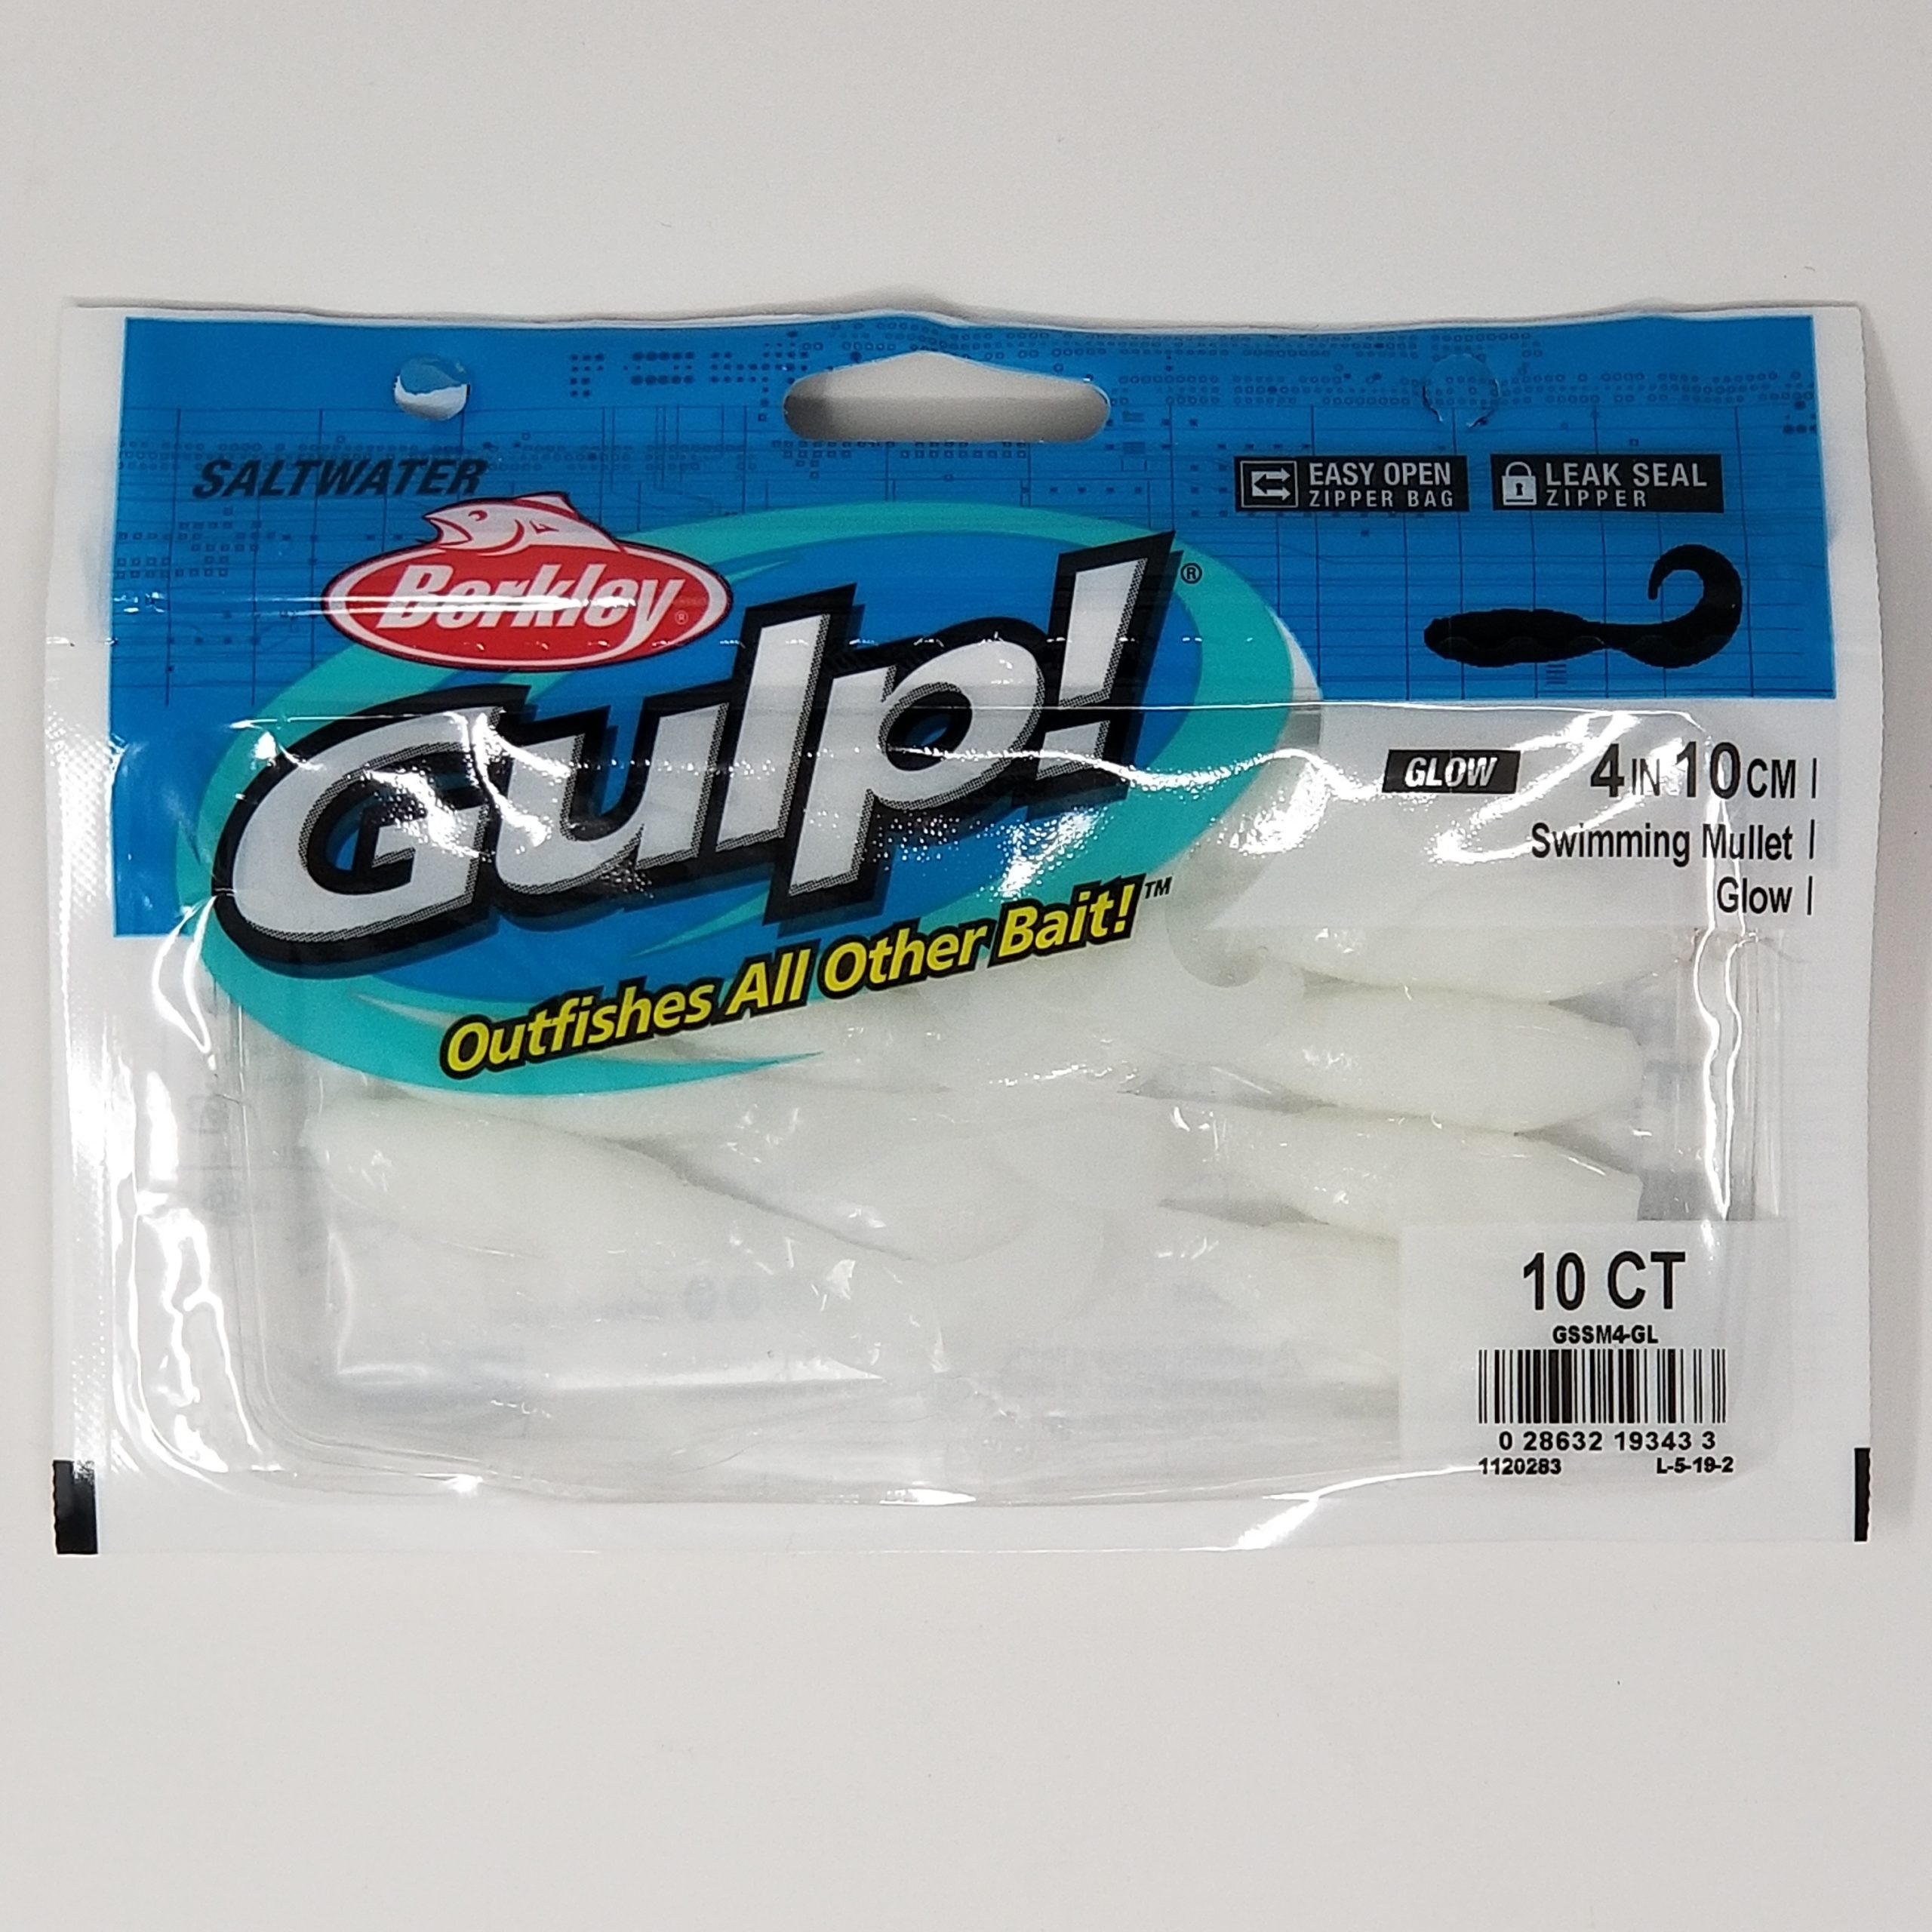 Saltwater Swimming Mullet 4in/10cm 12.5oz Recharge Baits Alive Details about   Berkley Gulp 